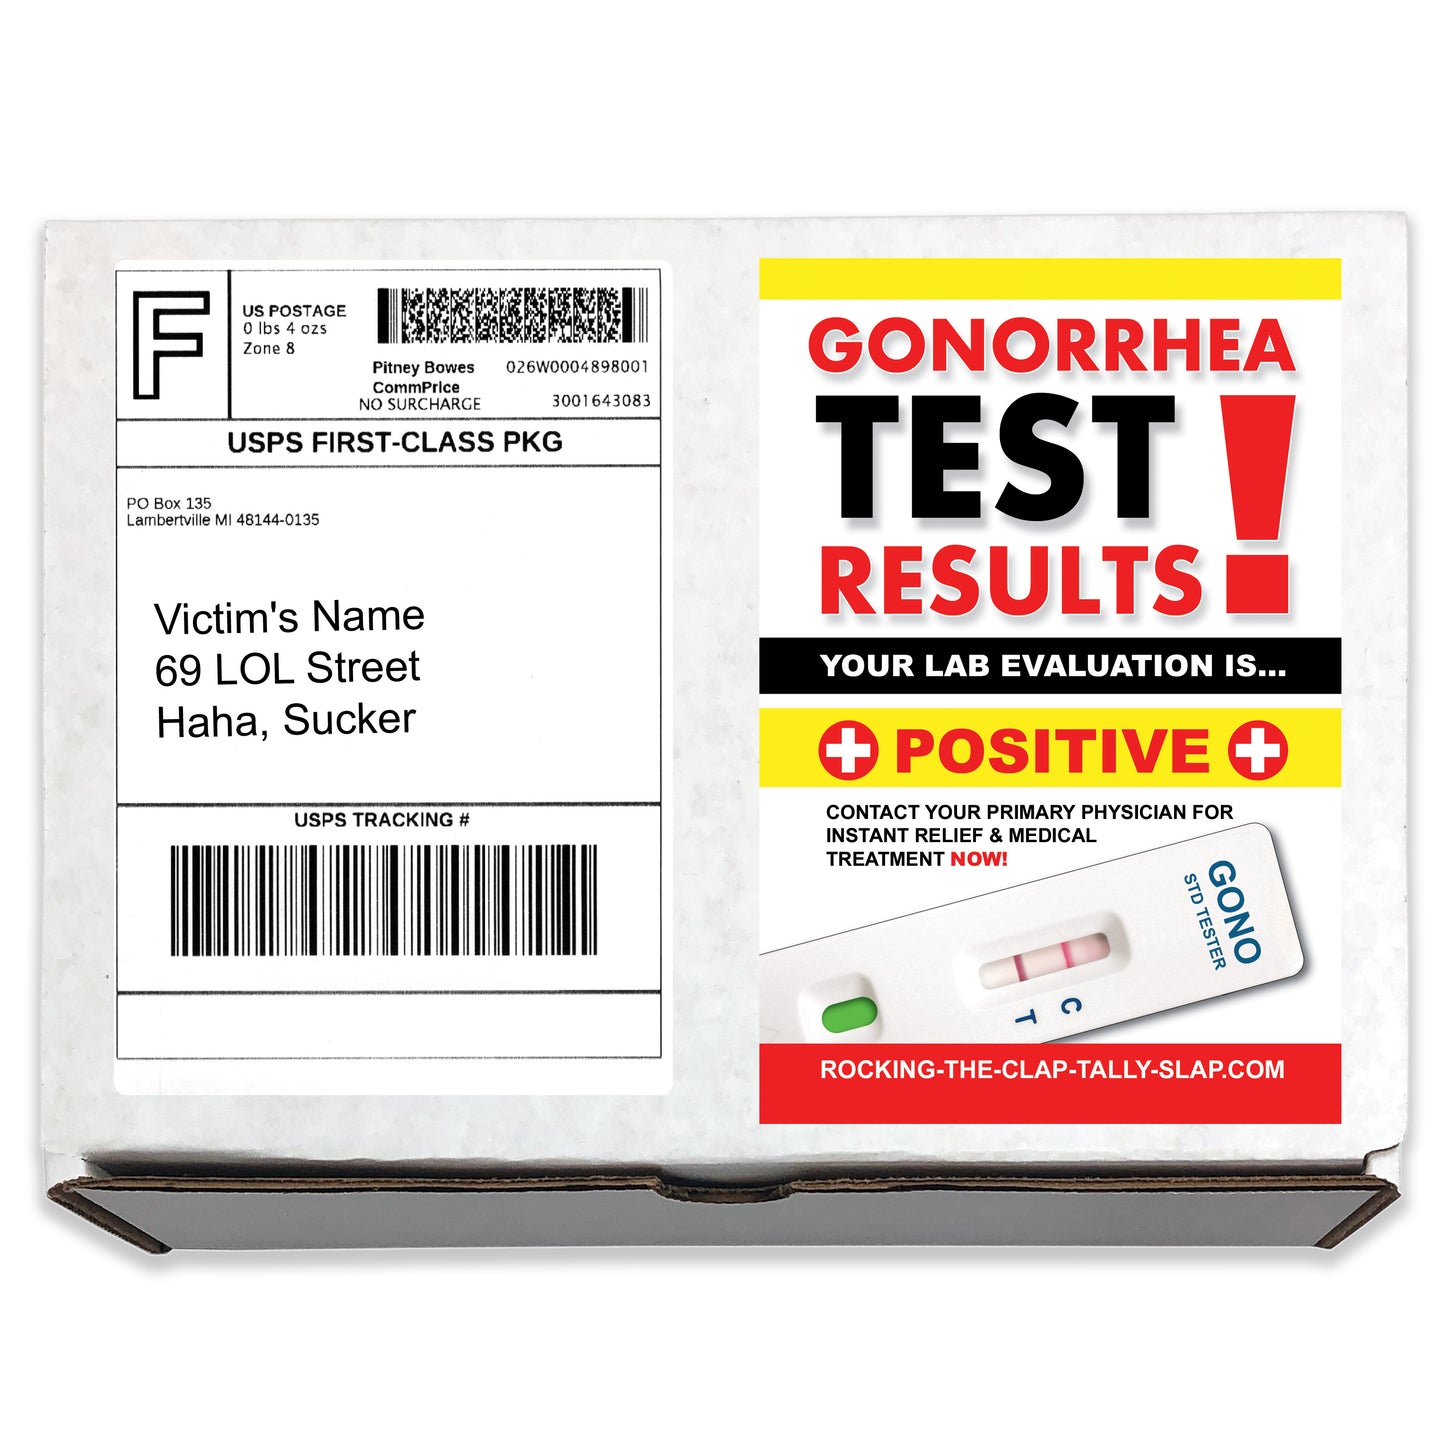 Gonorrhea Test Results Prank